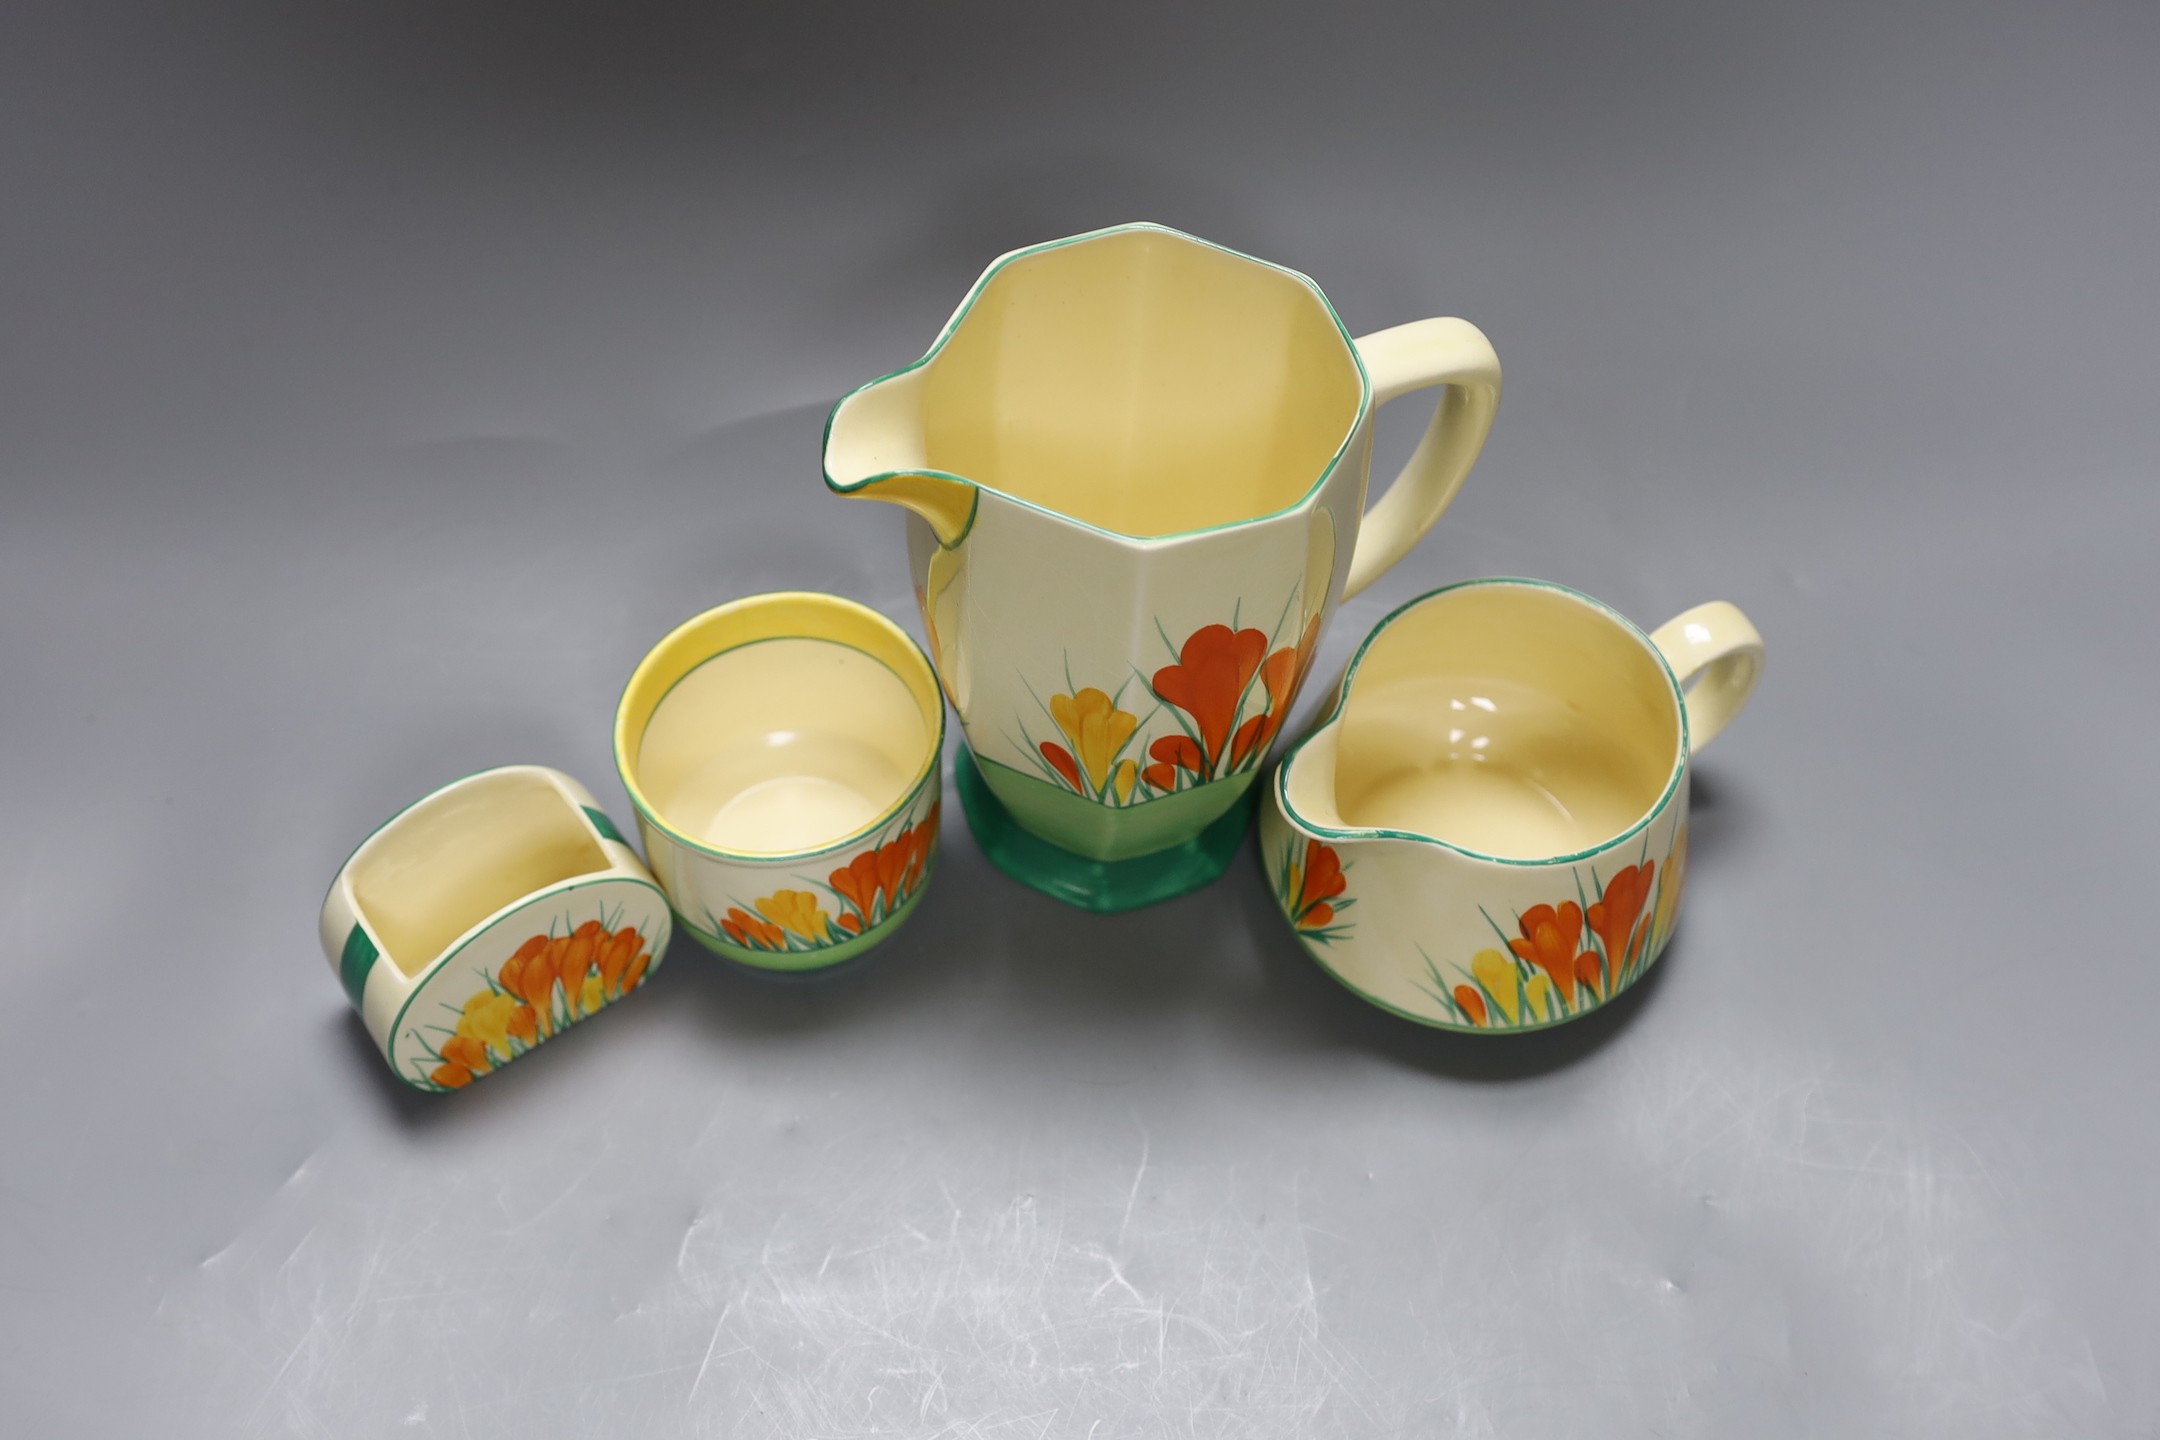 Two Clarice cliff “Sungleam”, crocus jugs and two pots, (4), tallest jug 17 cms high